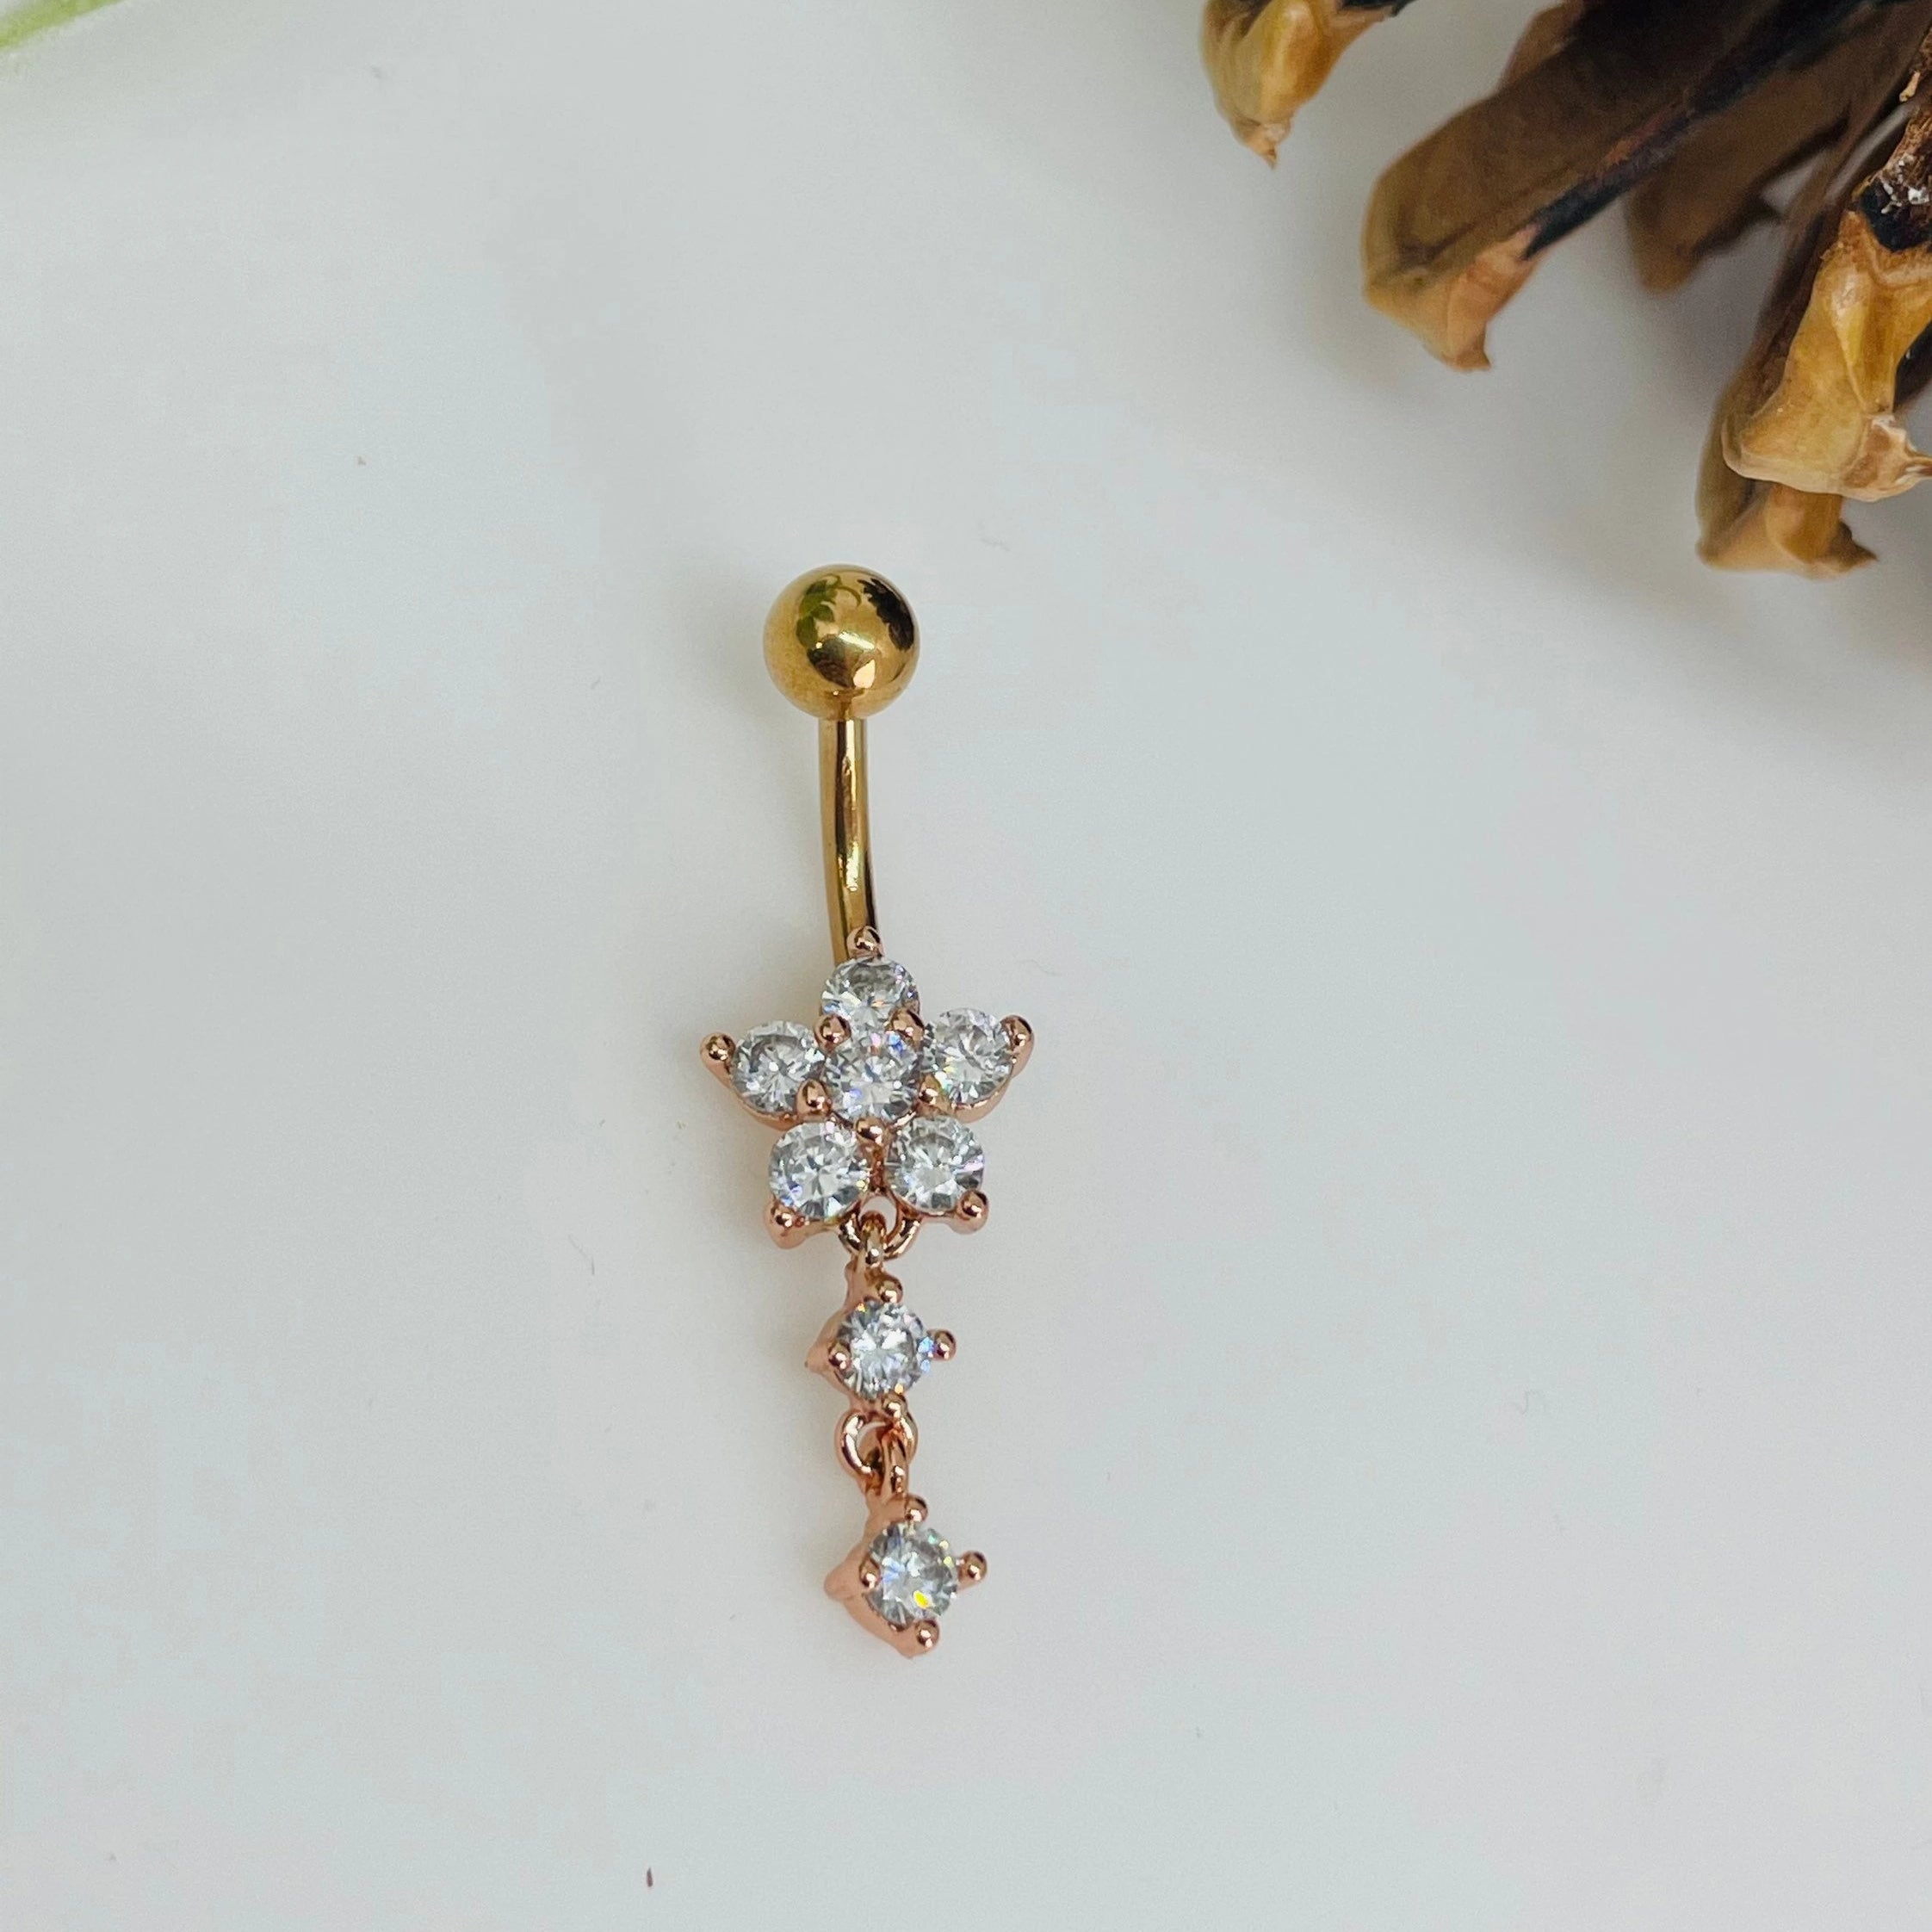 Clear Gem Heart of Dragon Dangle Belly Ring